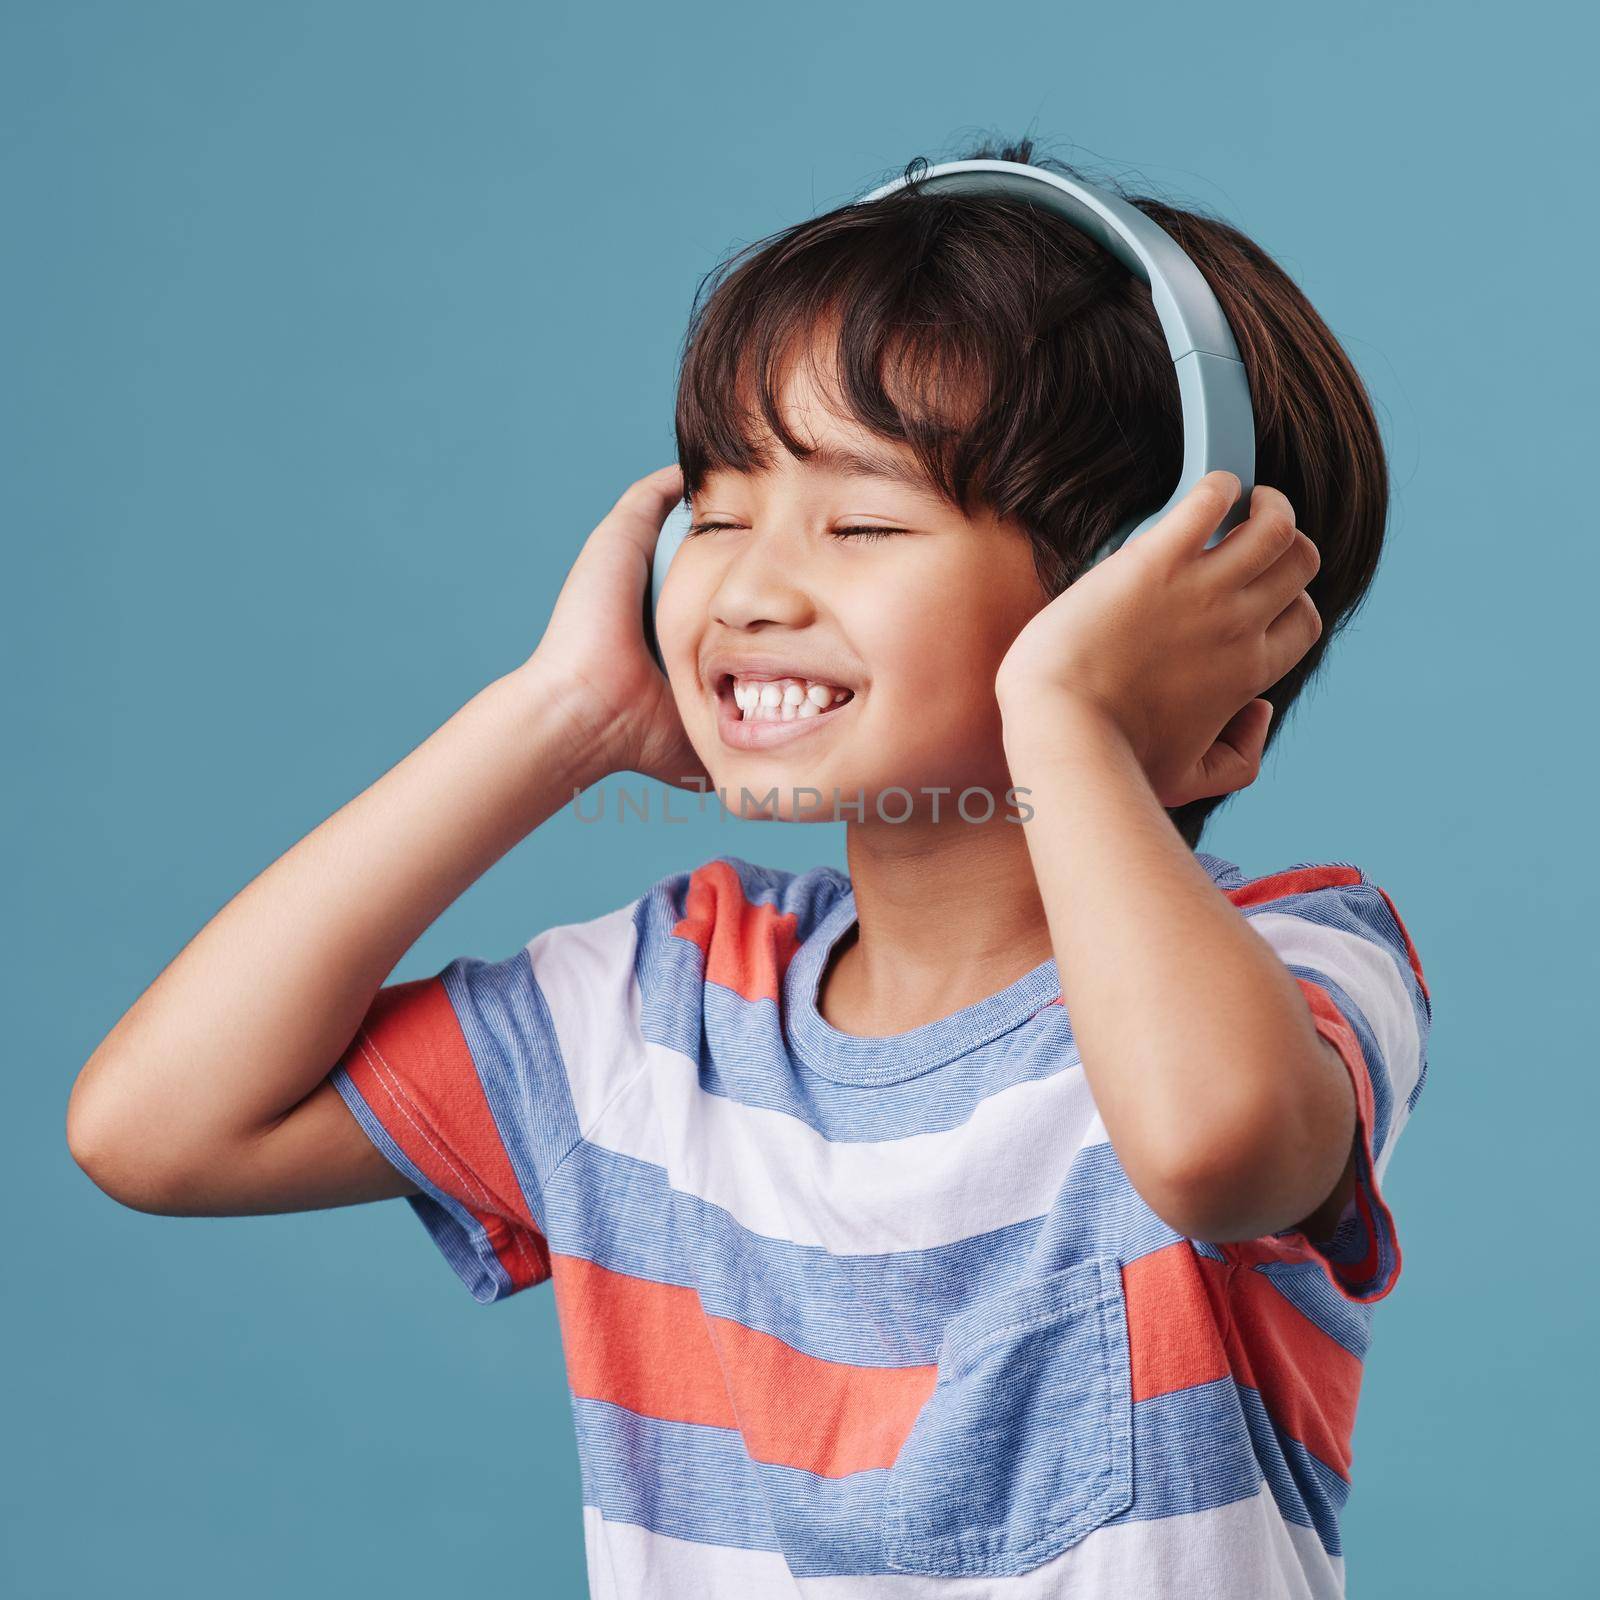 A cute young asian boy enjoying listening to music from his headphones. Adorable Chinese kid feeling the magic of music while posing against a blue studio background.